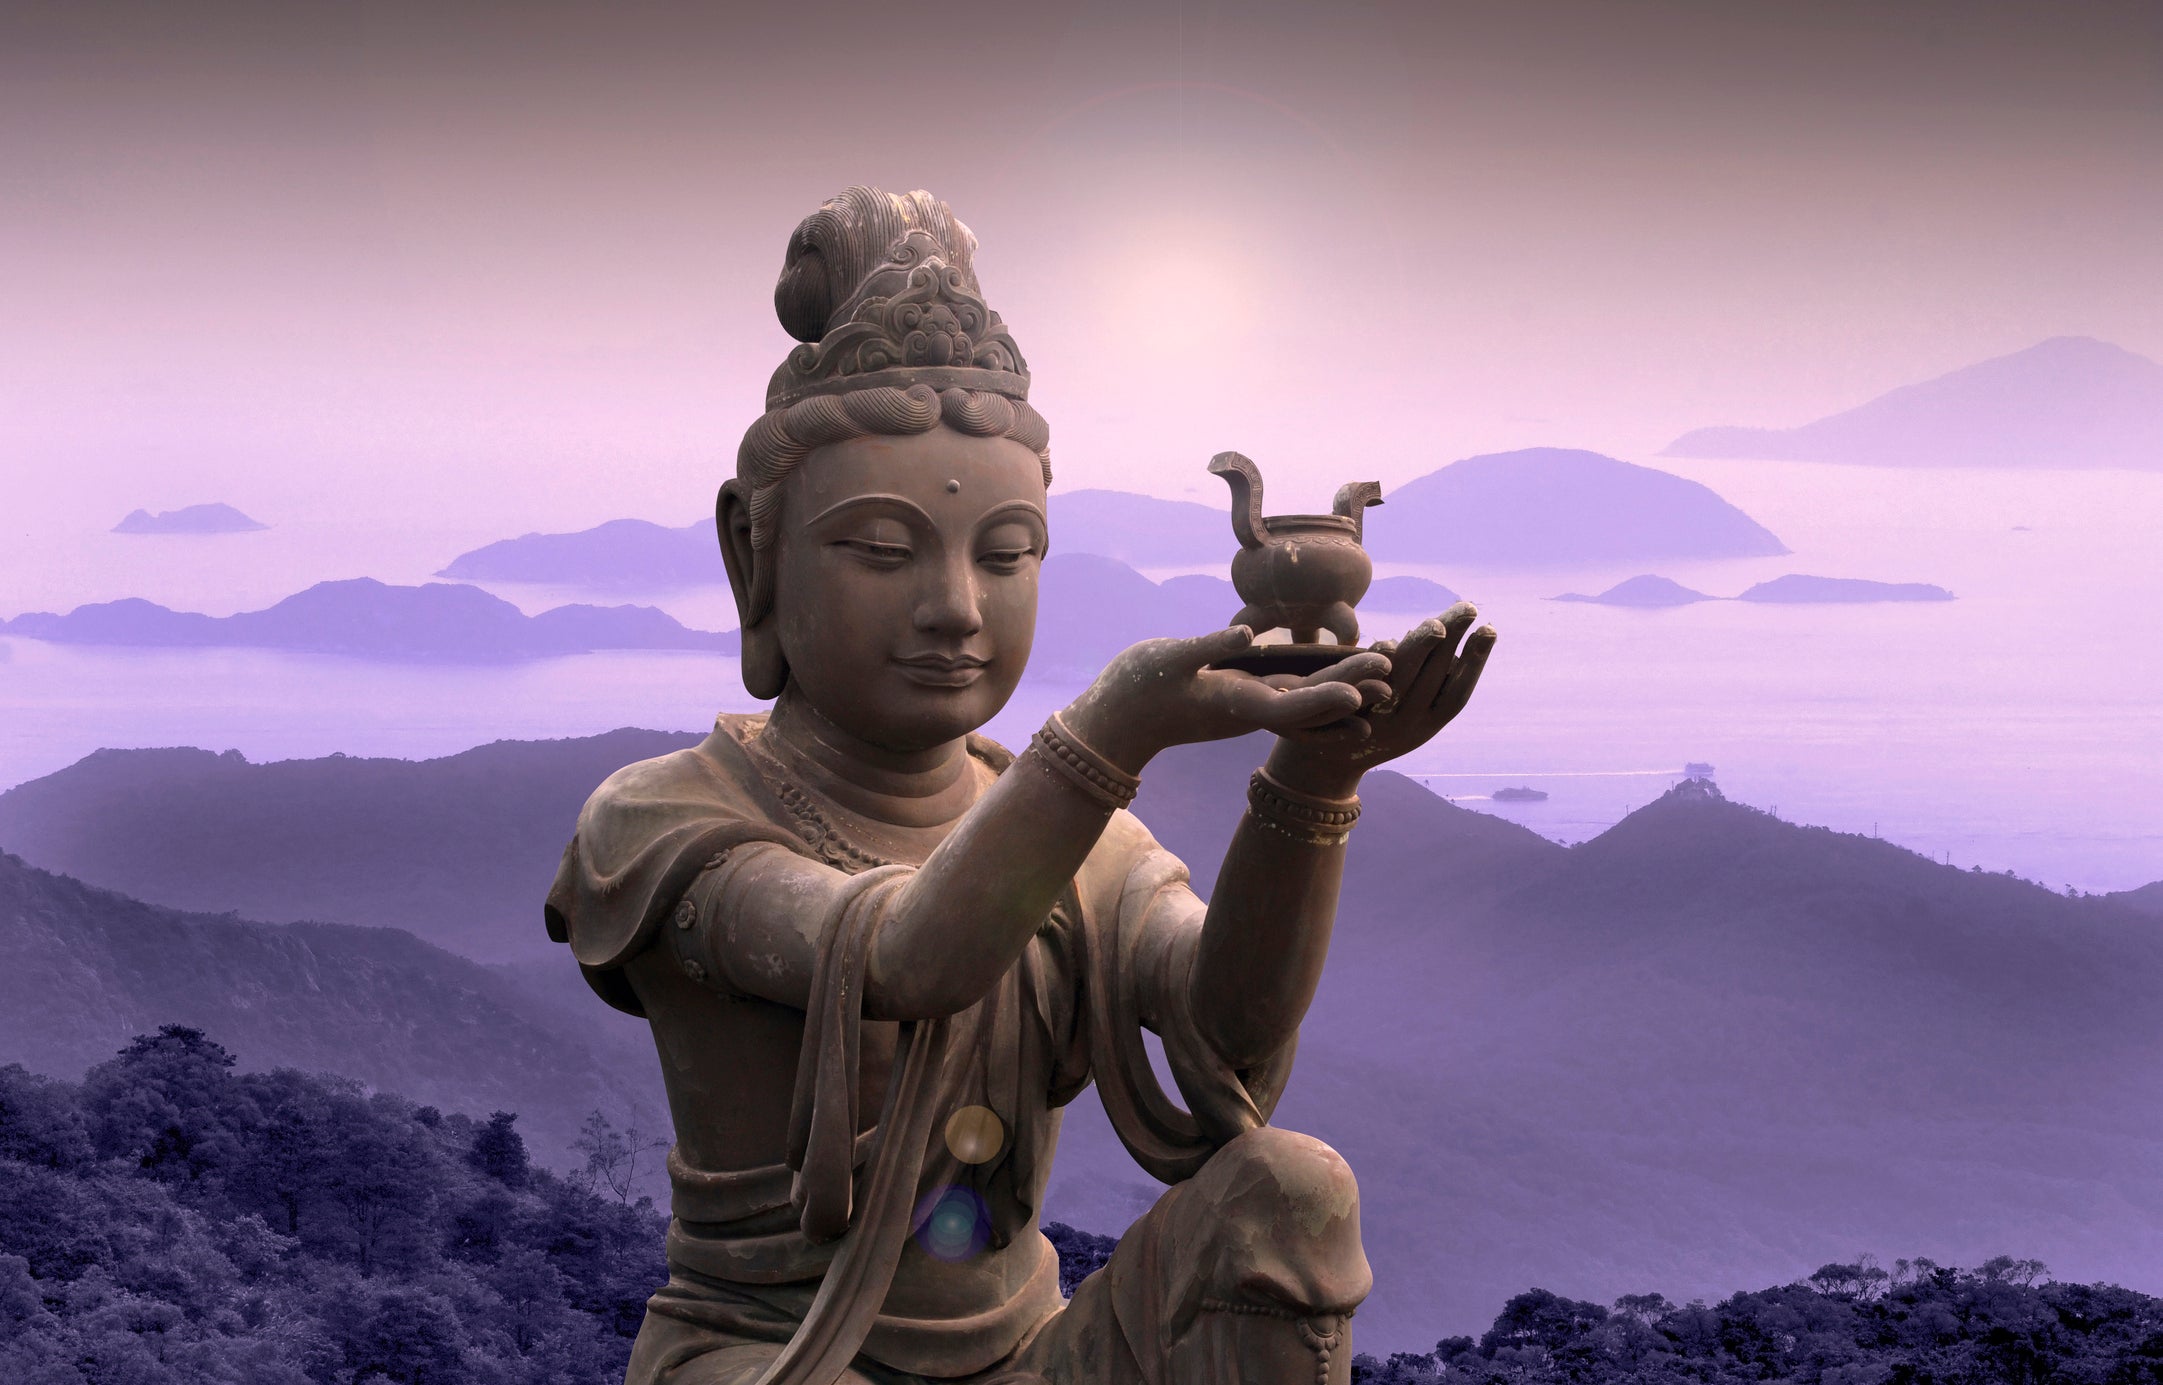 Why do we think of Buddhism as peaceful? | The Independent